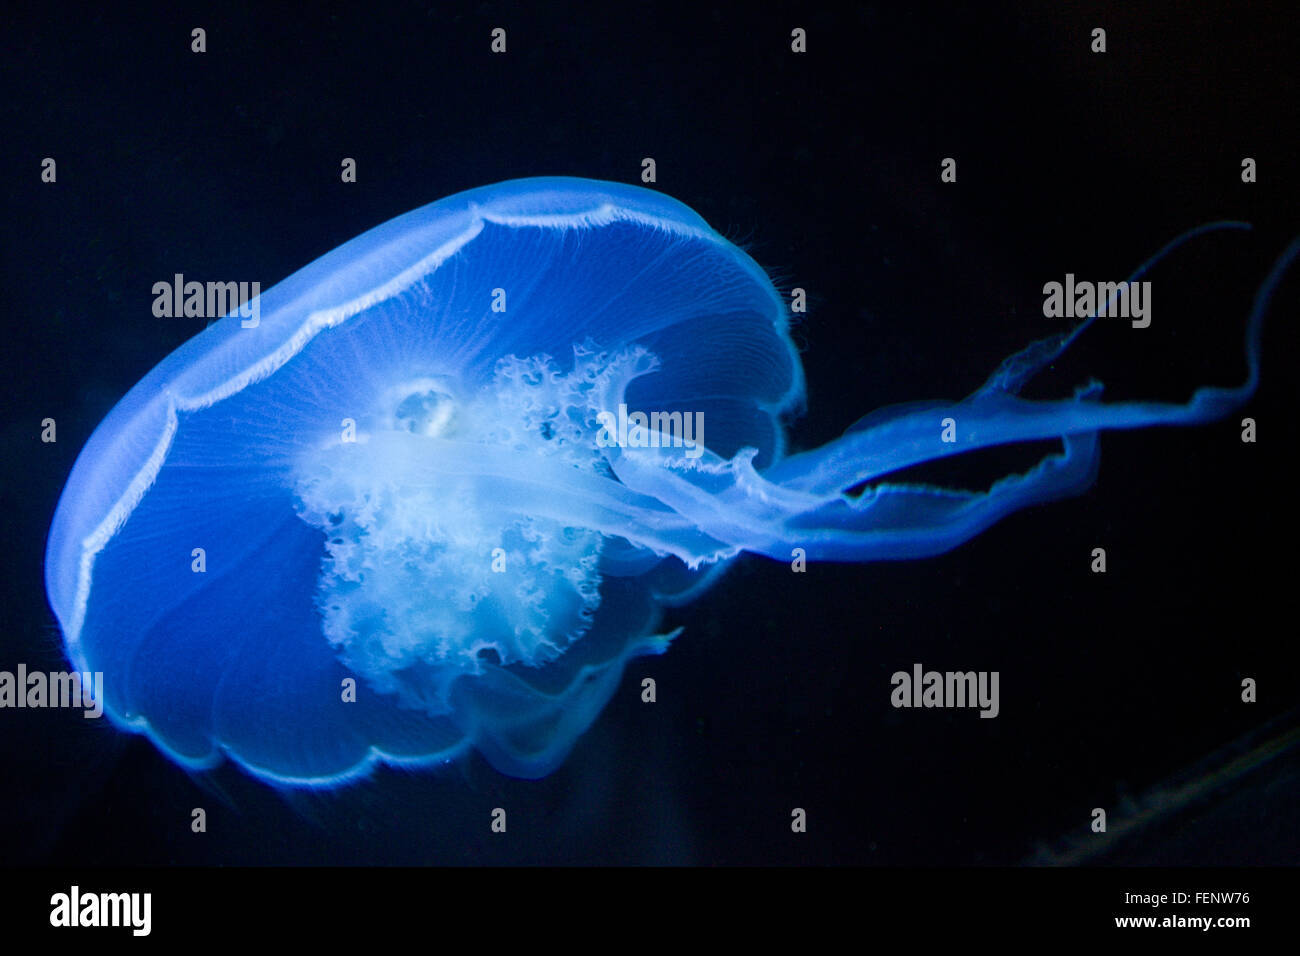 Close-Up Of Jellyfish Against Black Background Stock Photo